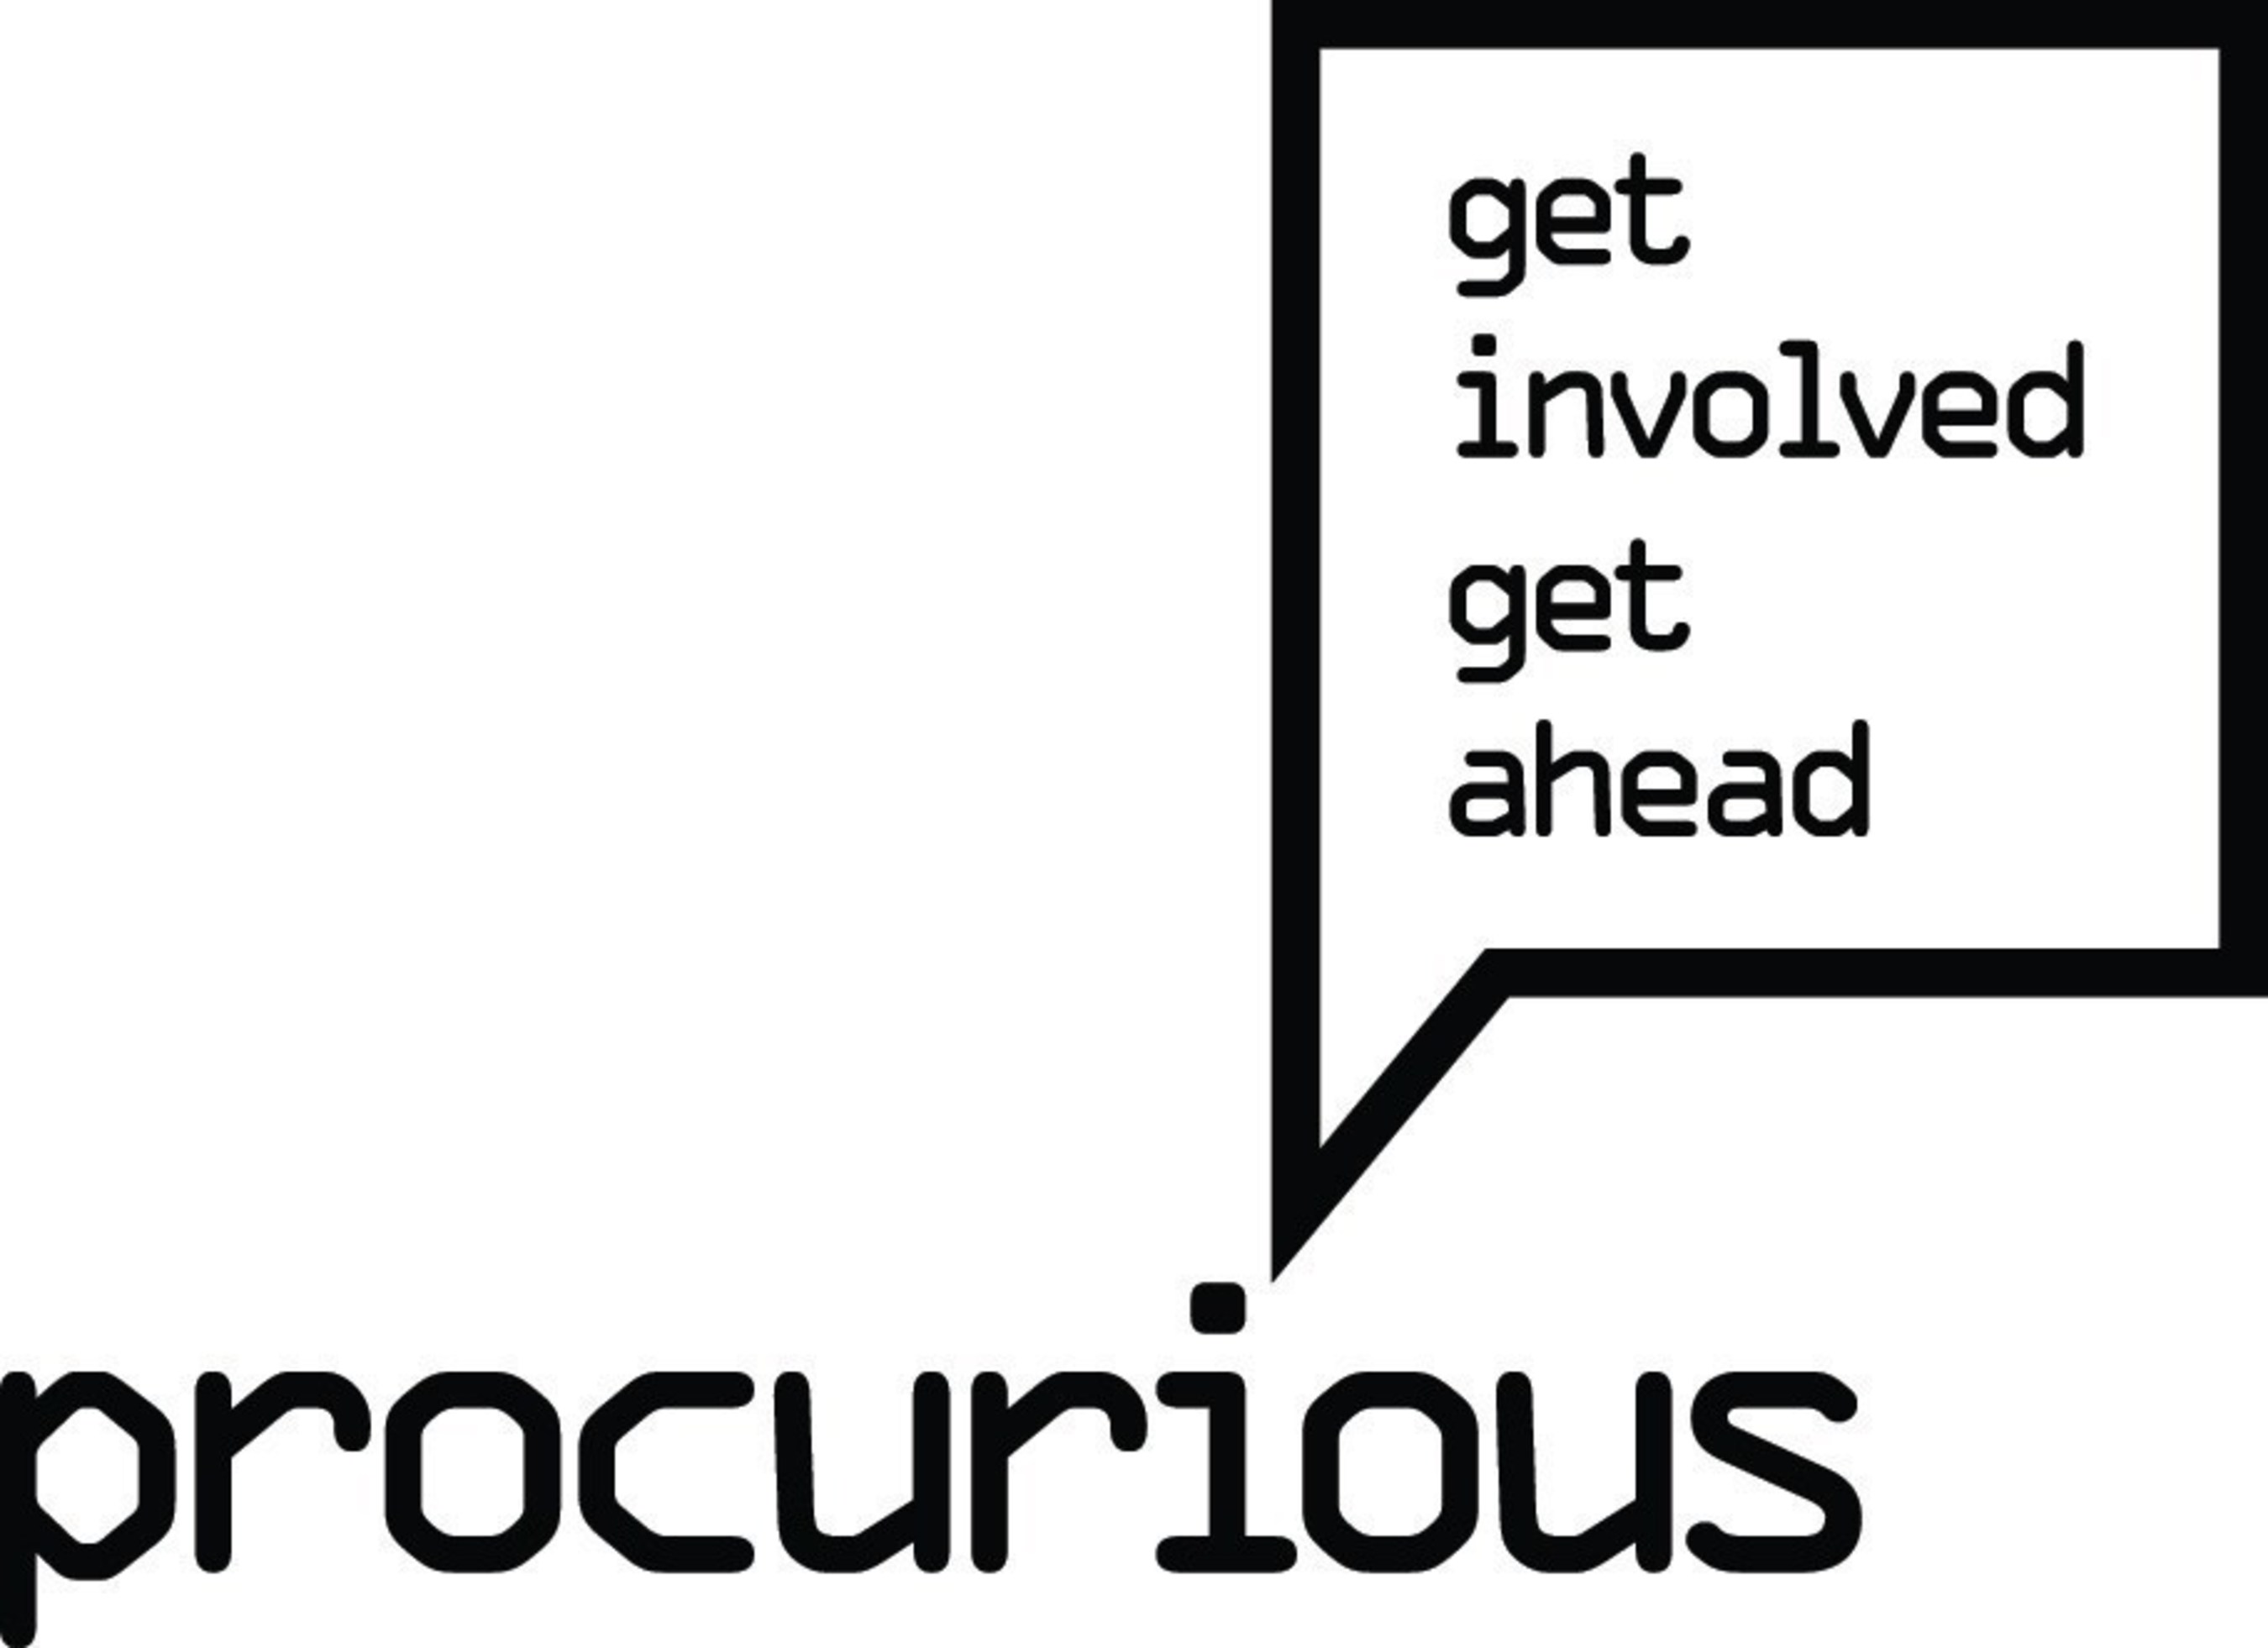 Procurious is the world's first online business community dedicated to procurement and supply chain professionals. (PRNewsFoto/Procurious)